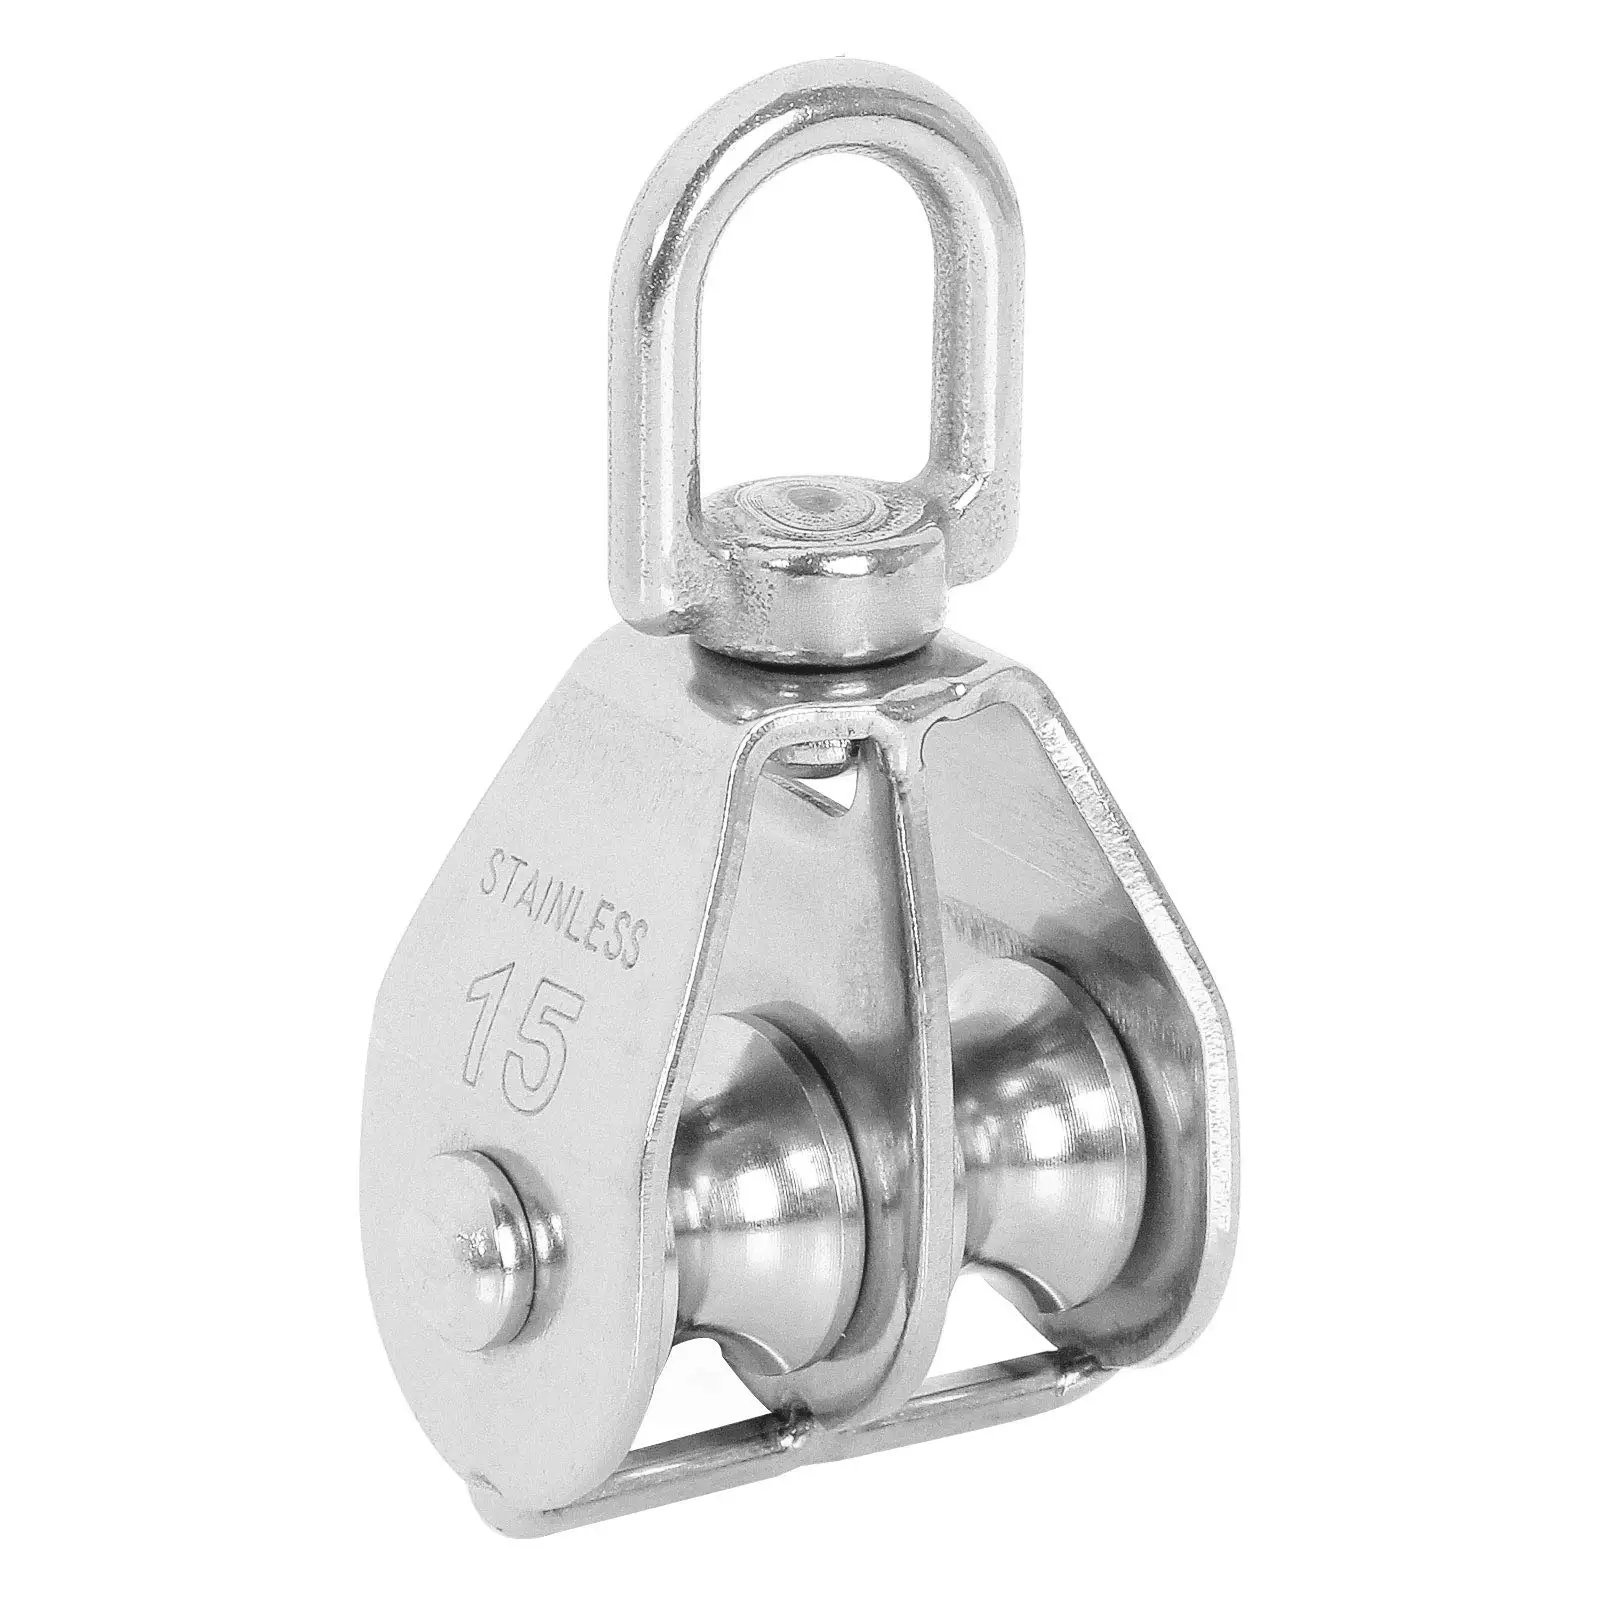 Double Pulley Block Hanging Wire Pulley Roller 304 Stainless Steel Heavy Duty Double Wheel Block Pulley for Lifting Rope (M15) 10pcs m20 single pulley block 304 stainless steel hanging wire pulley roller swivel lifting wire rope cable towing wheel